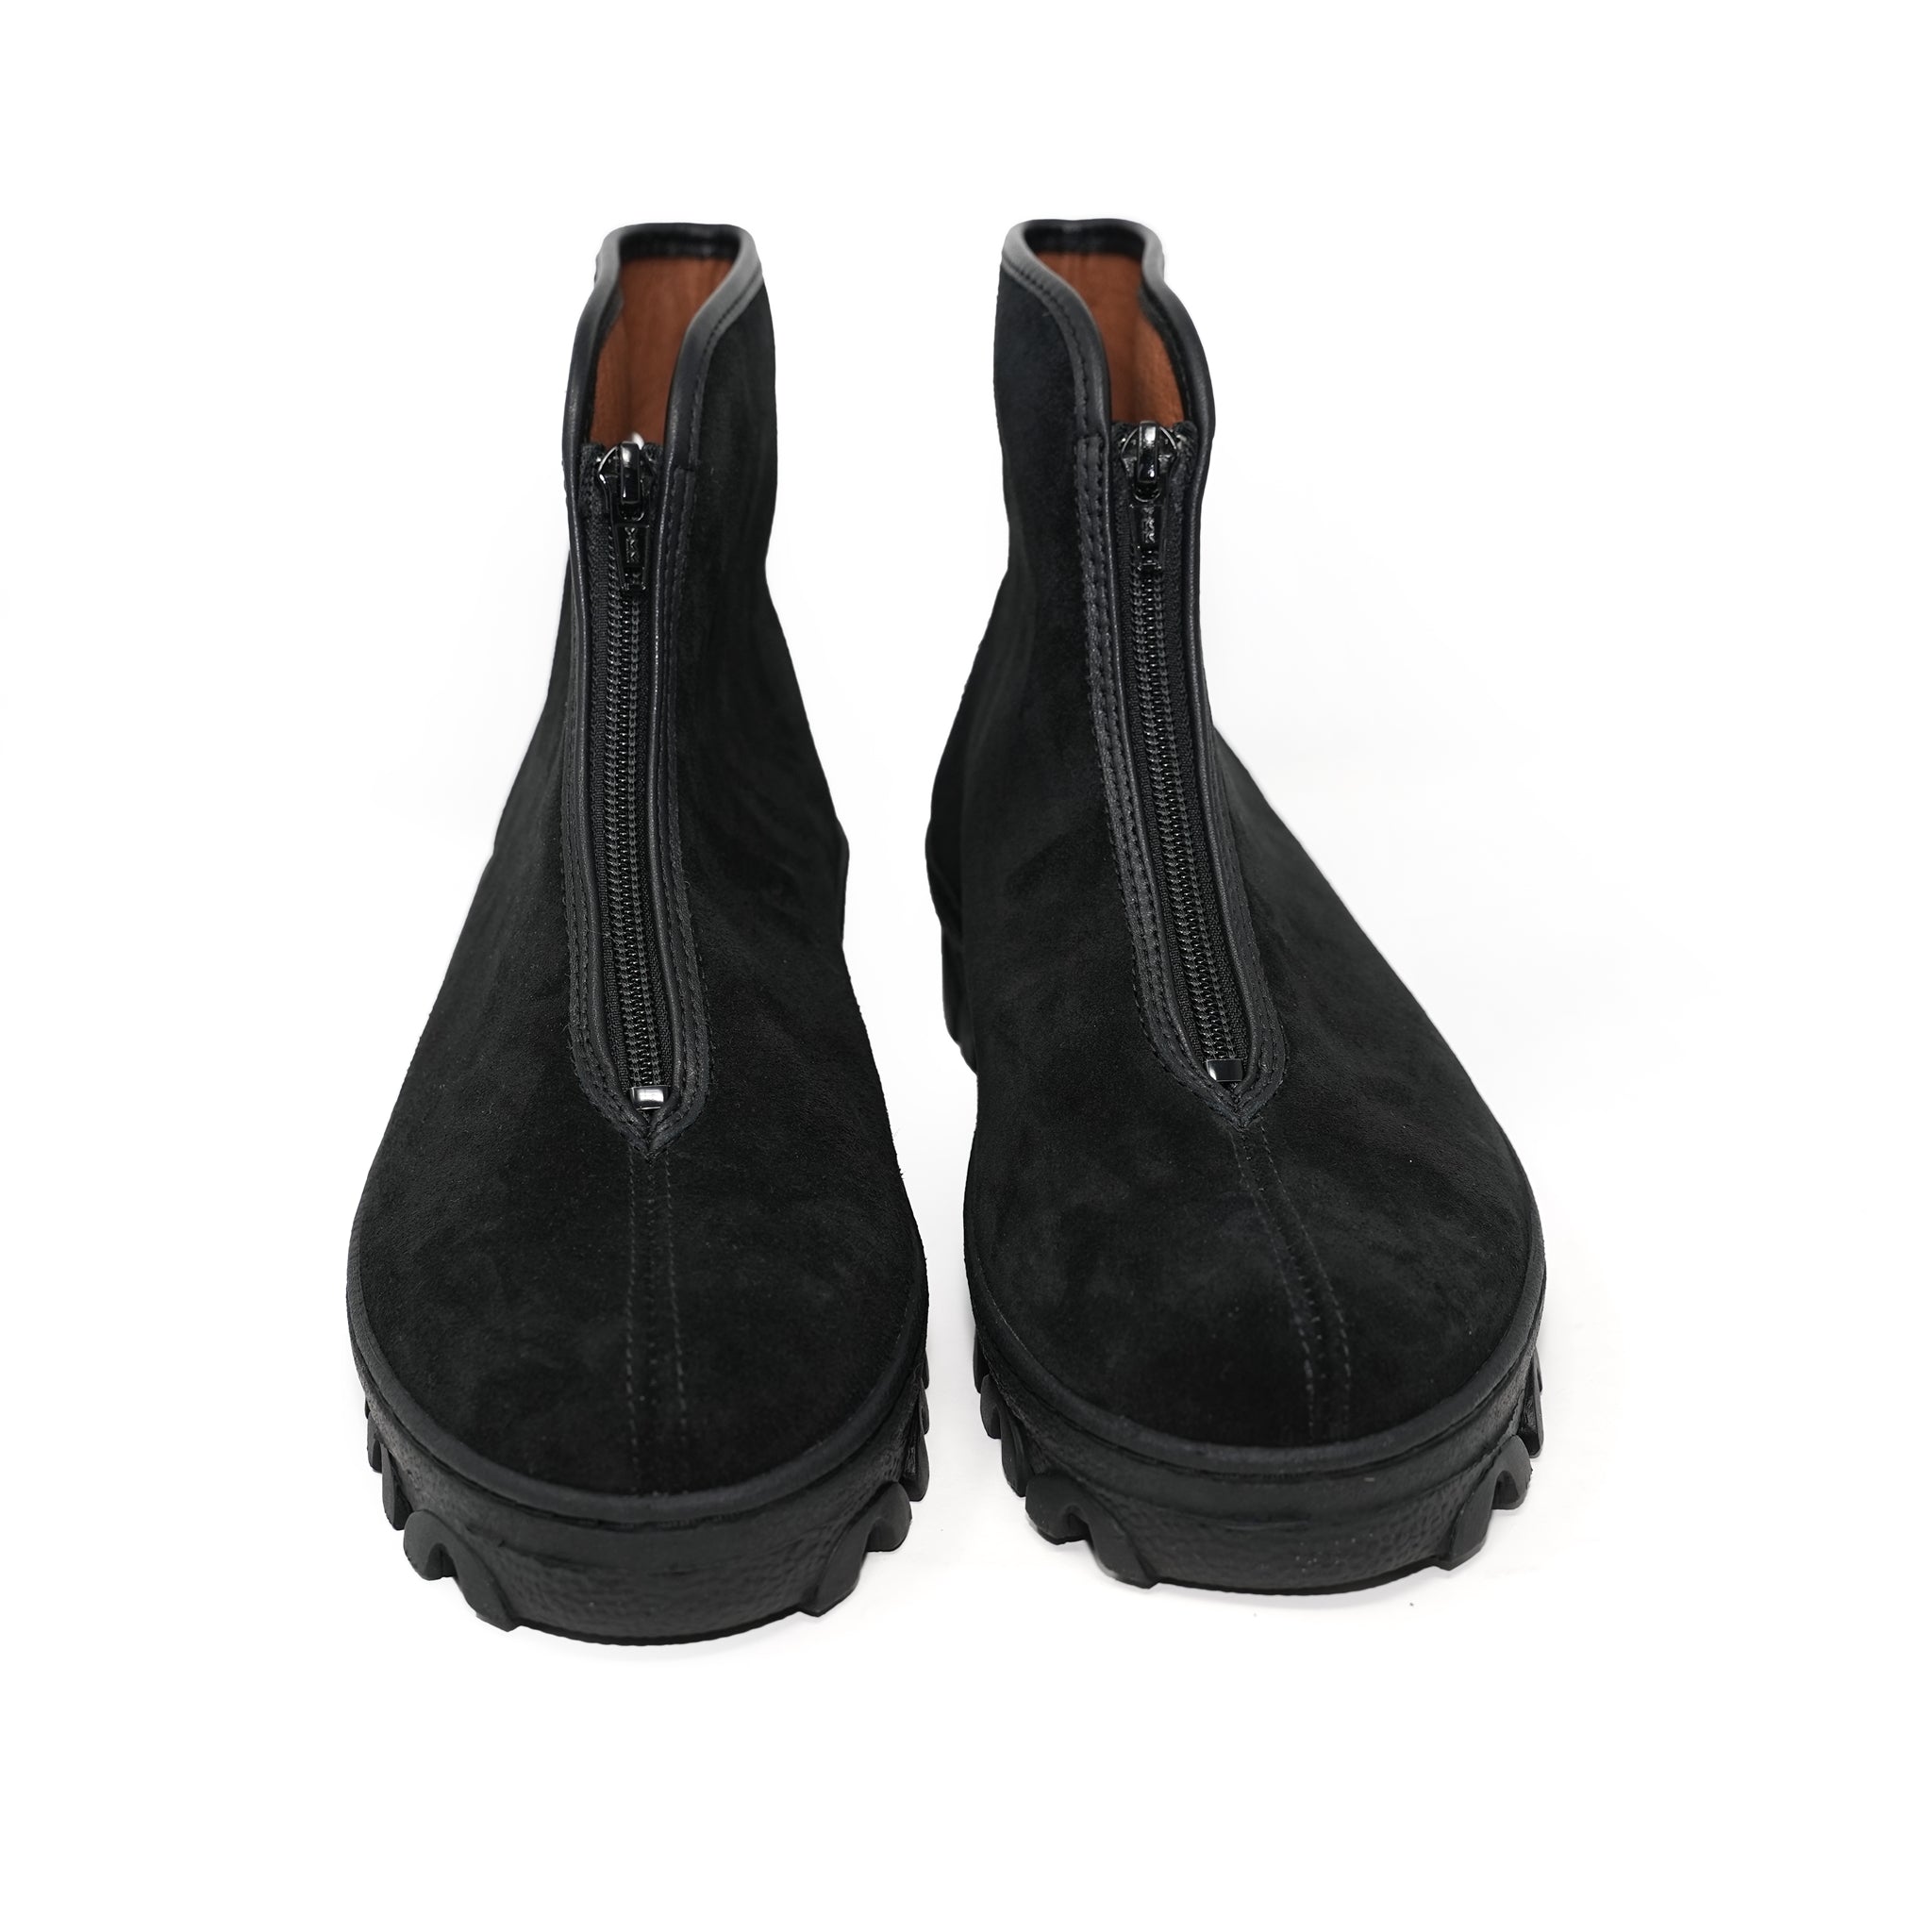 No:540SSB | Name:RUSSIAN MILITARY BOOTS | Color:Black Suede【REPRODUCTION OF FOUND_リプロダクションオブファウンド】